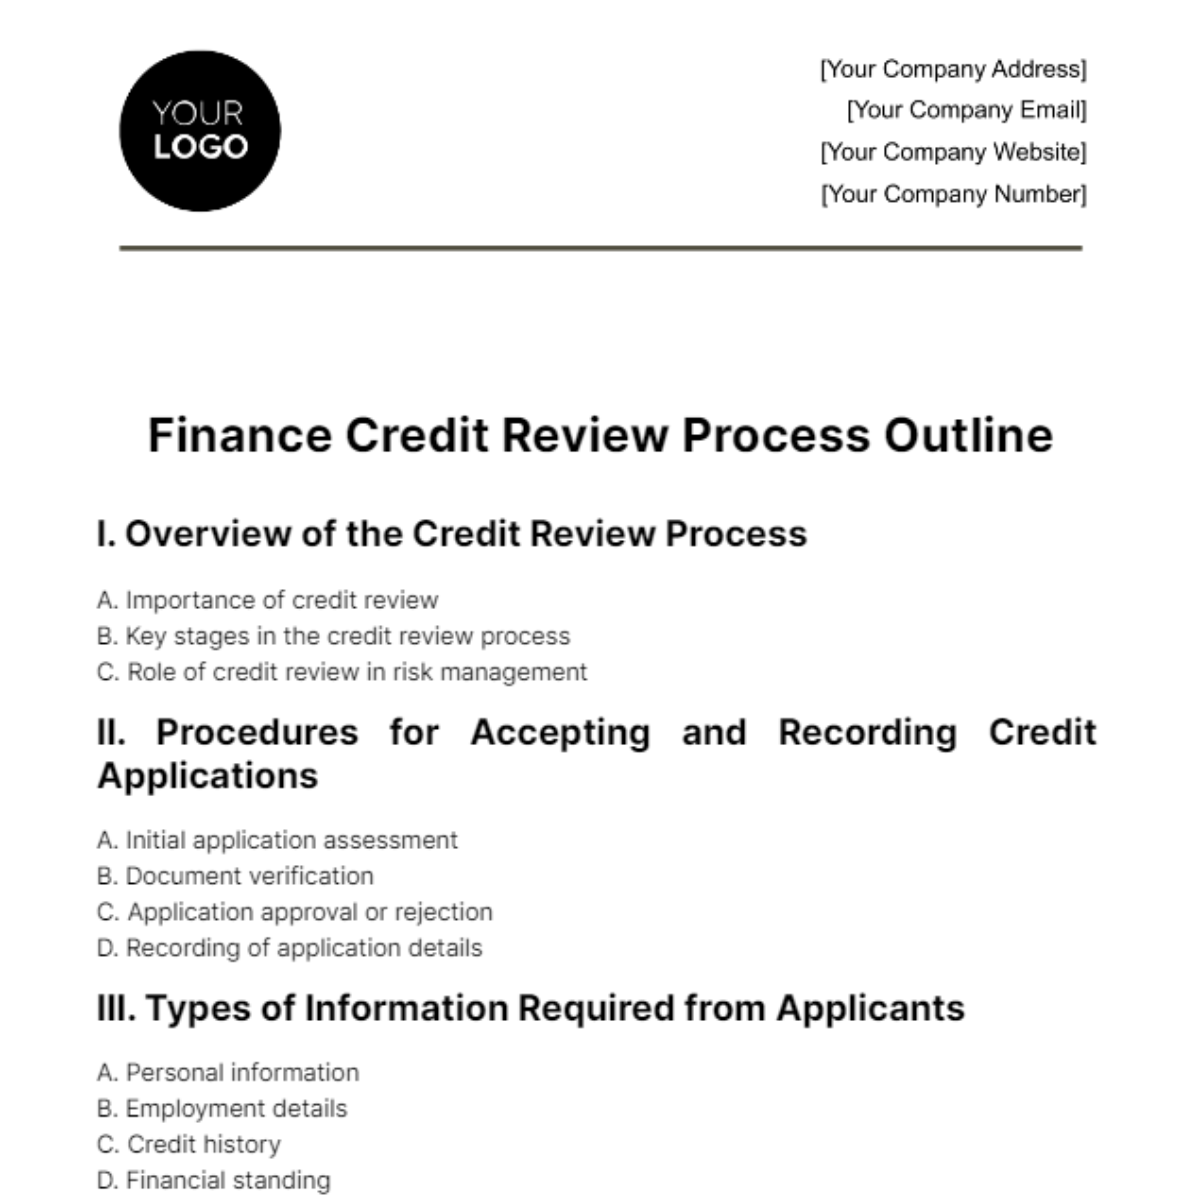 Finance Credit Review Process Outline Template